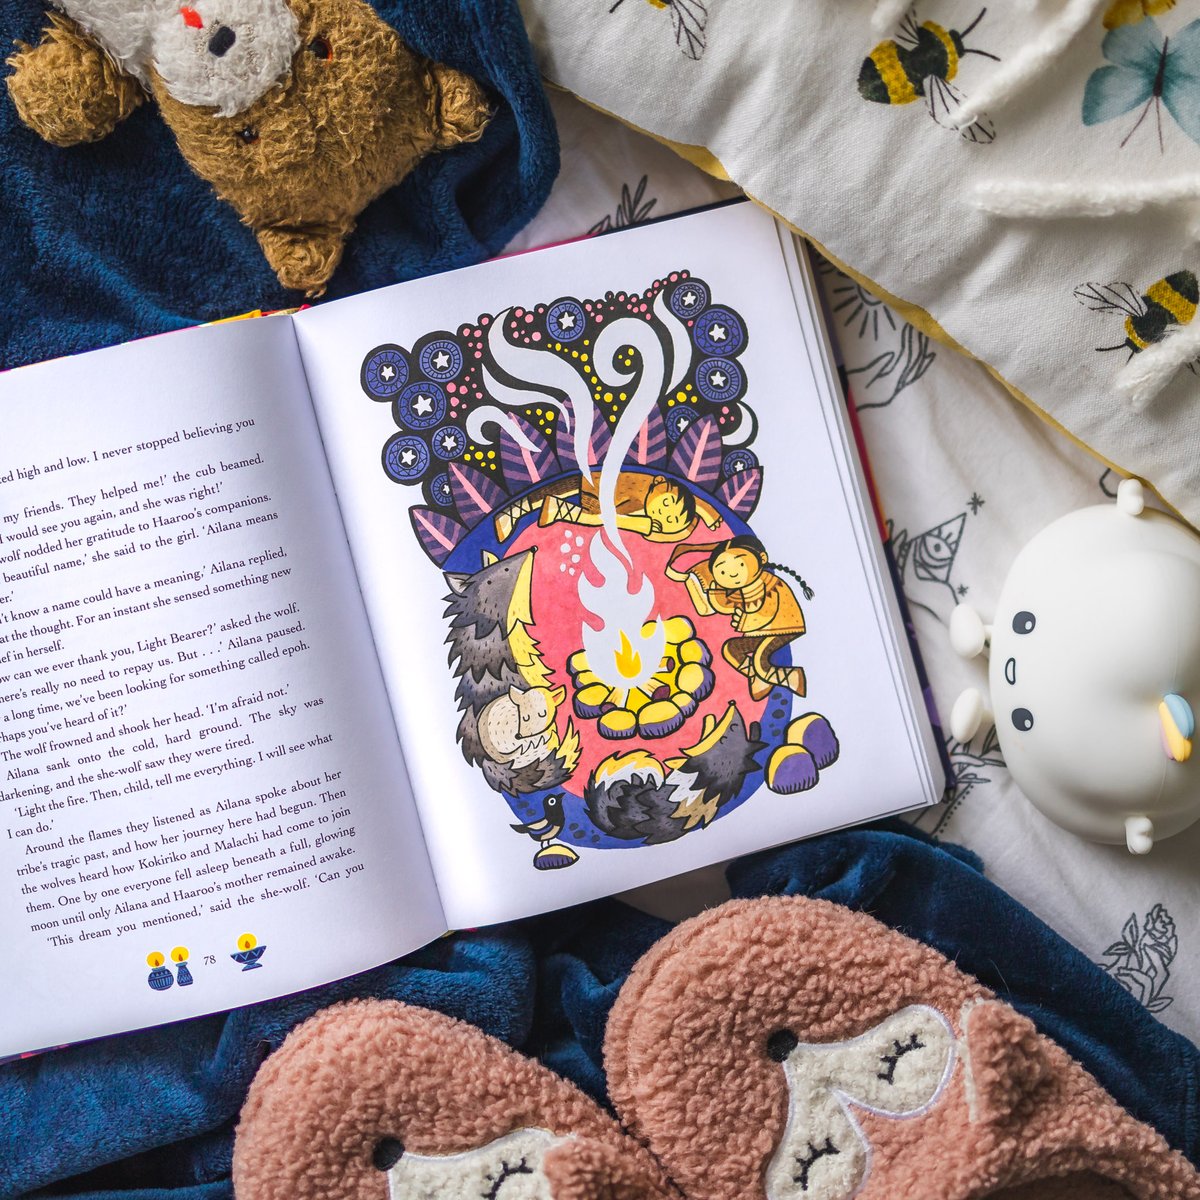 A comforting story tonight for a happy day tomorrow . . . A gorgeous gift to treasure this Christmas and beyond, #TheFaberBookOfBedtimeStories is bursting with hope and joy. Fabulously illustrated by @jabberworks, the book features original stories from much-loved authors.